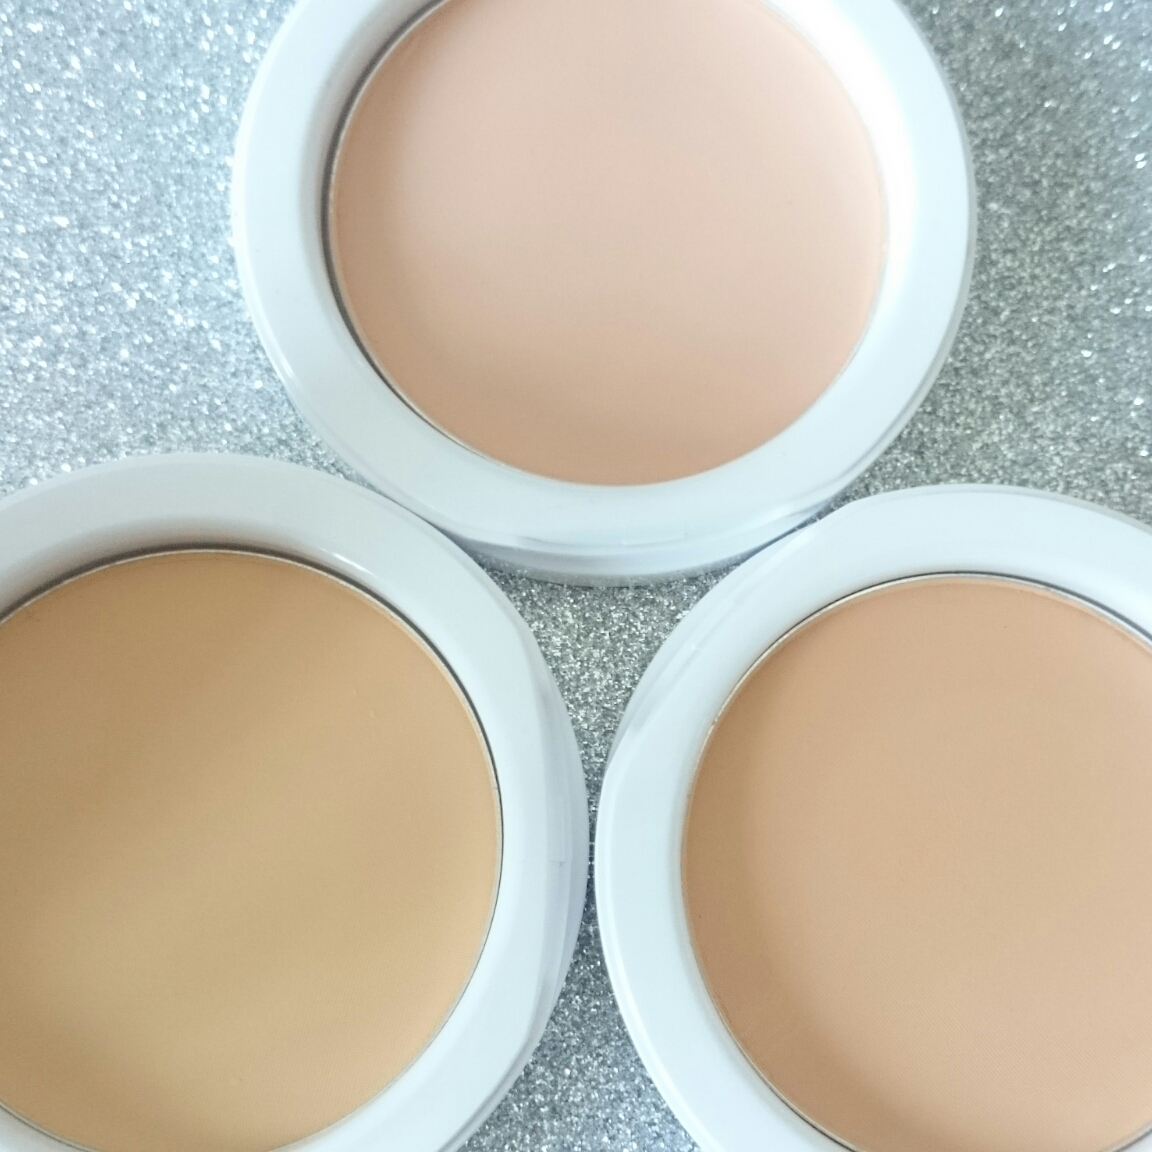 Maybelline White Super Fresh Compact Powder review and swatches